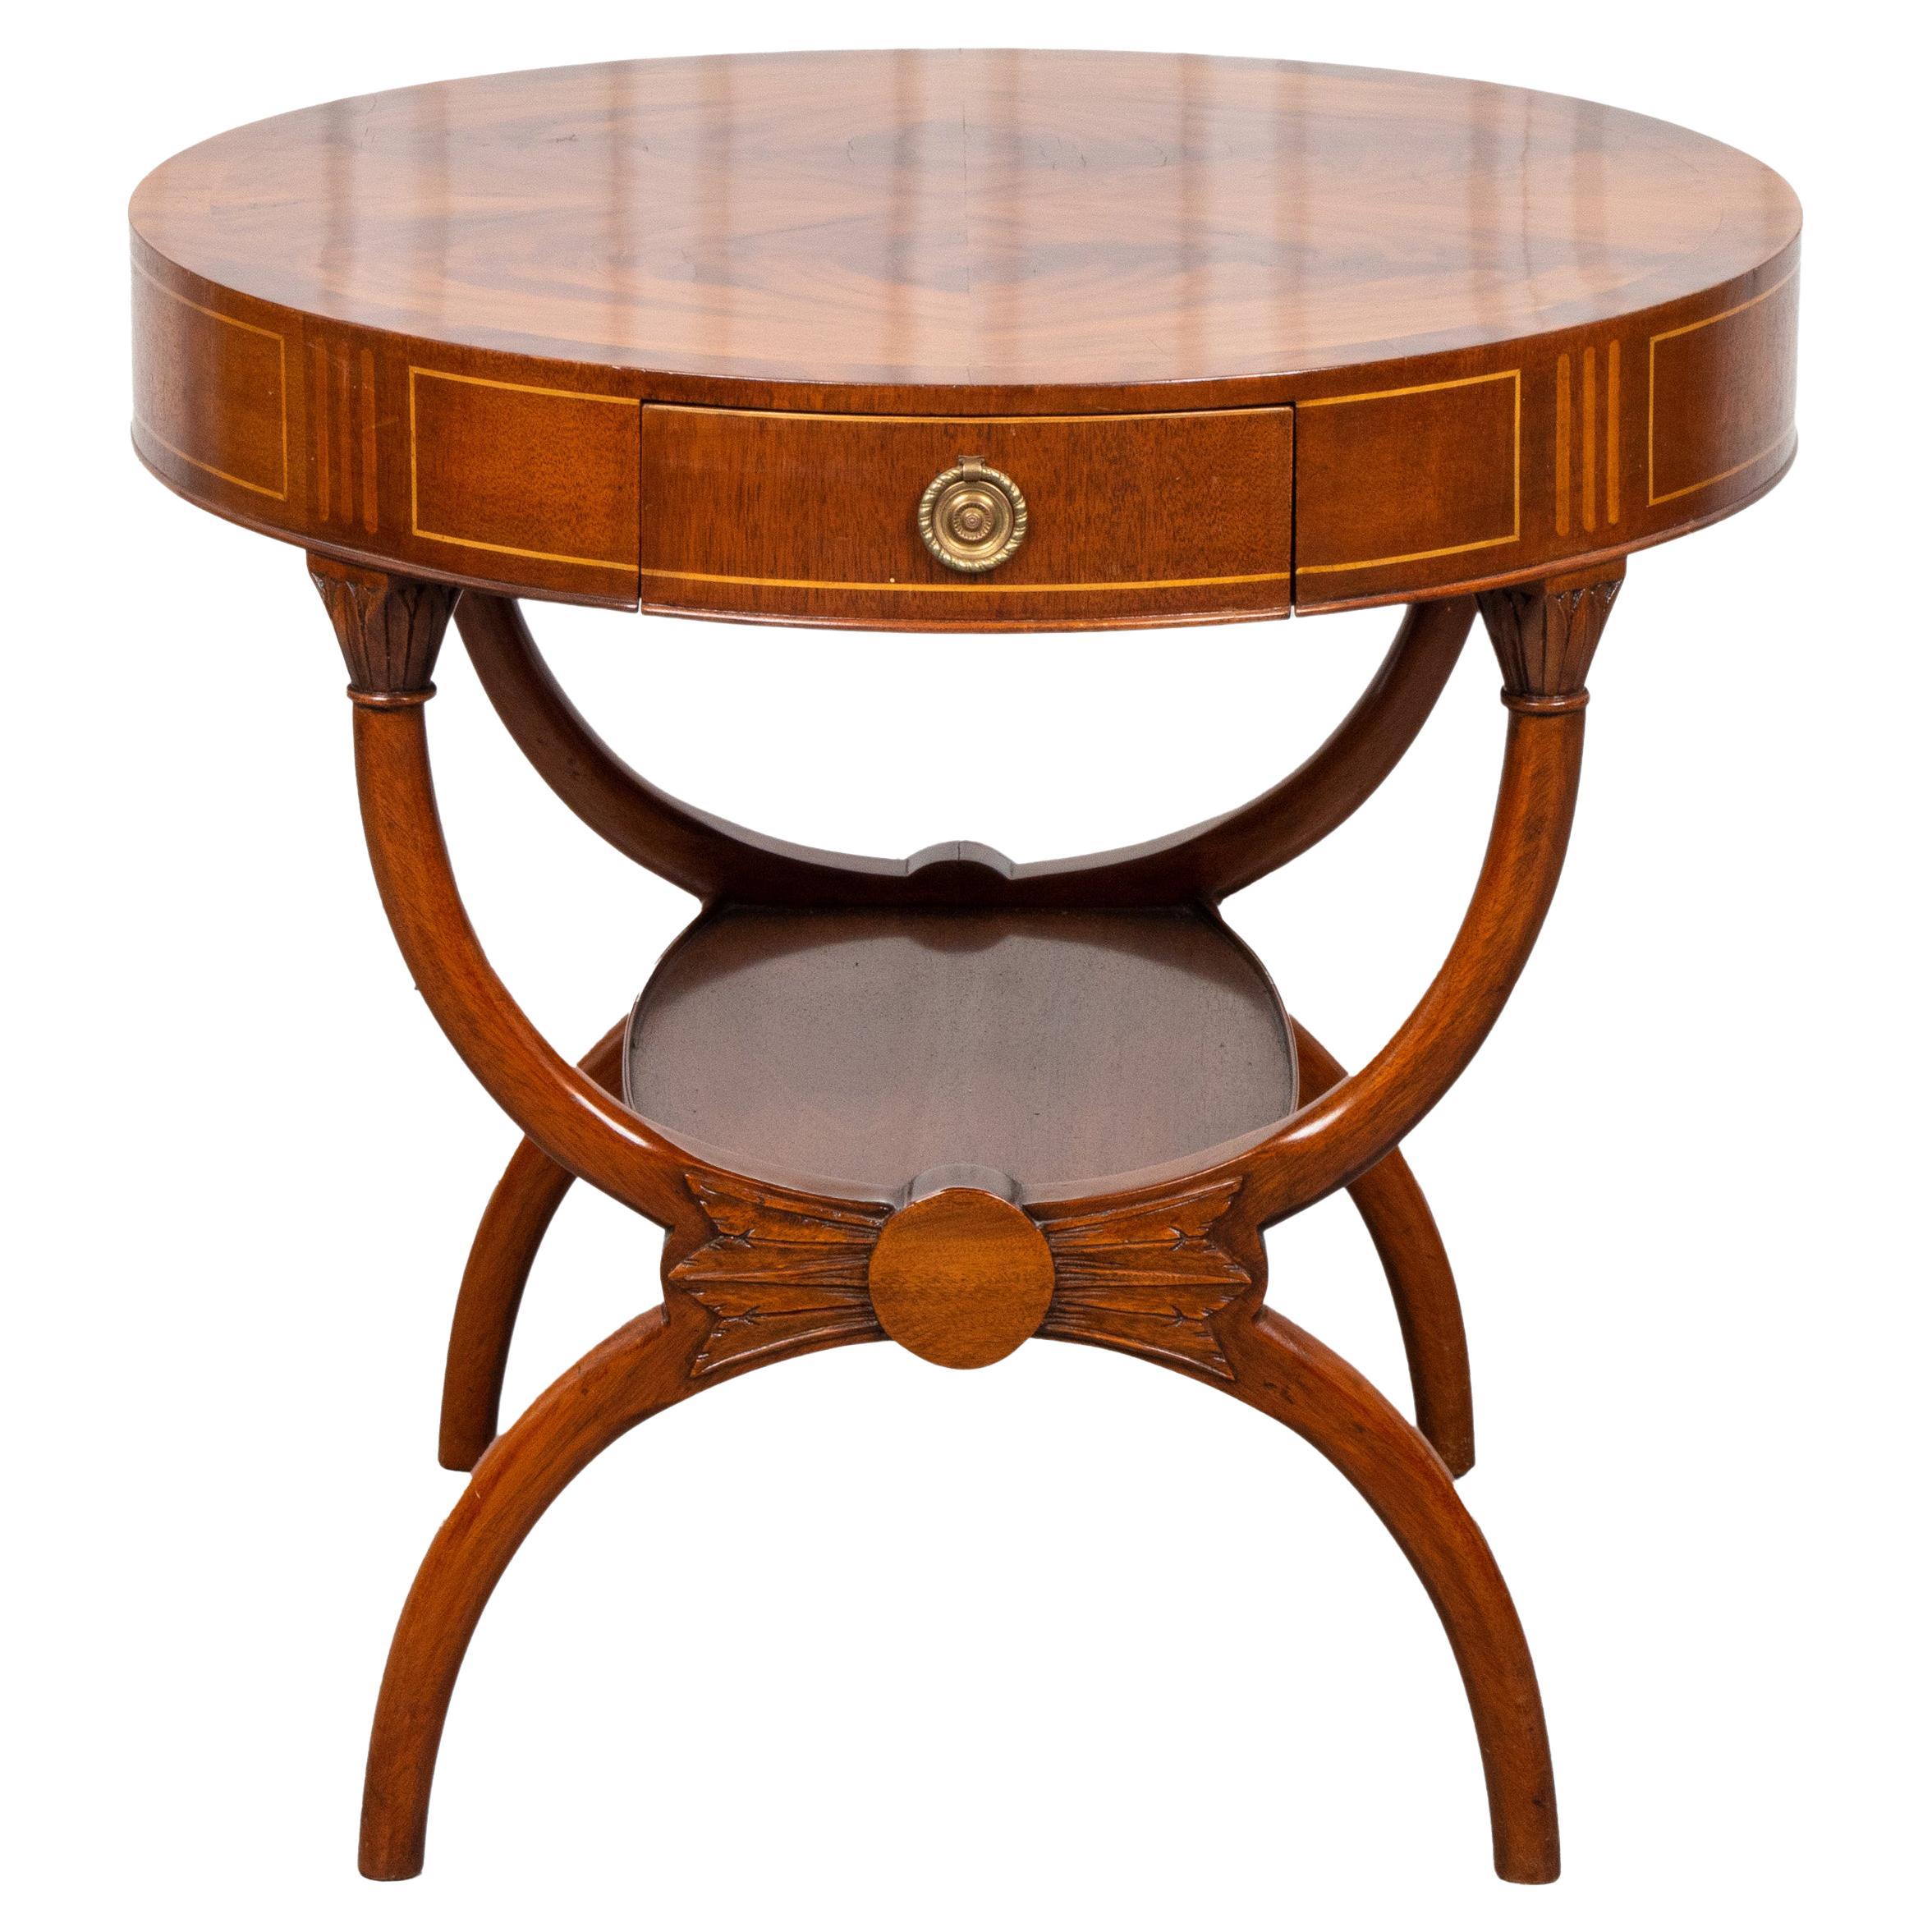 Regency Manner Inlaid Occasional Table